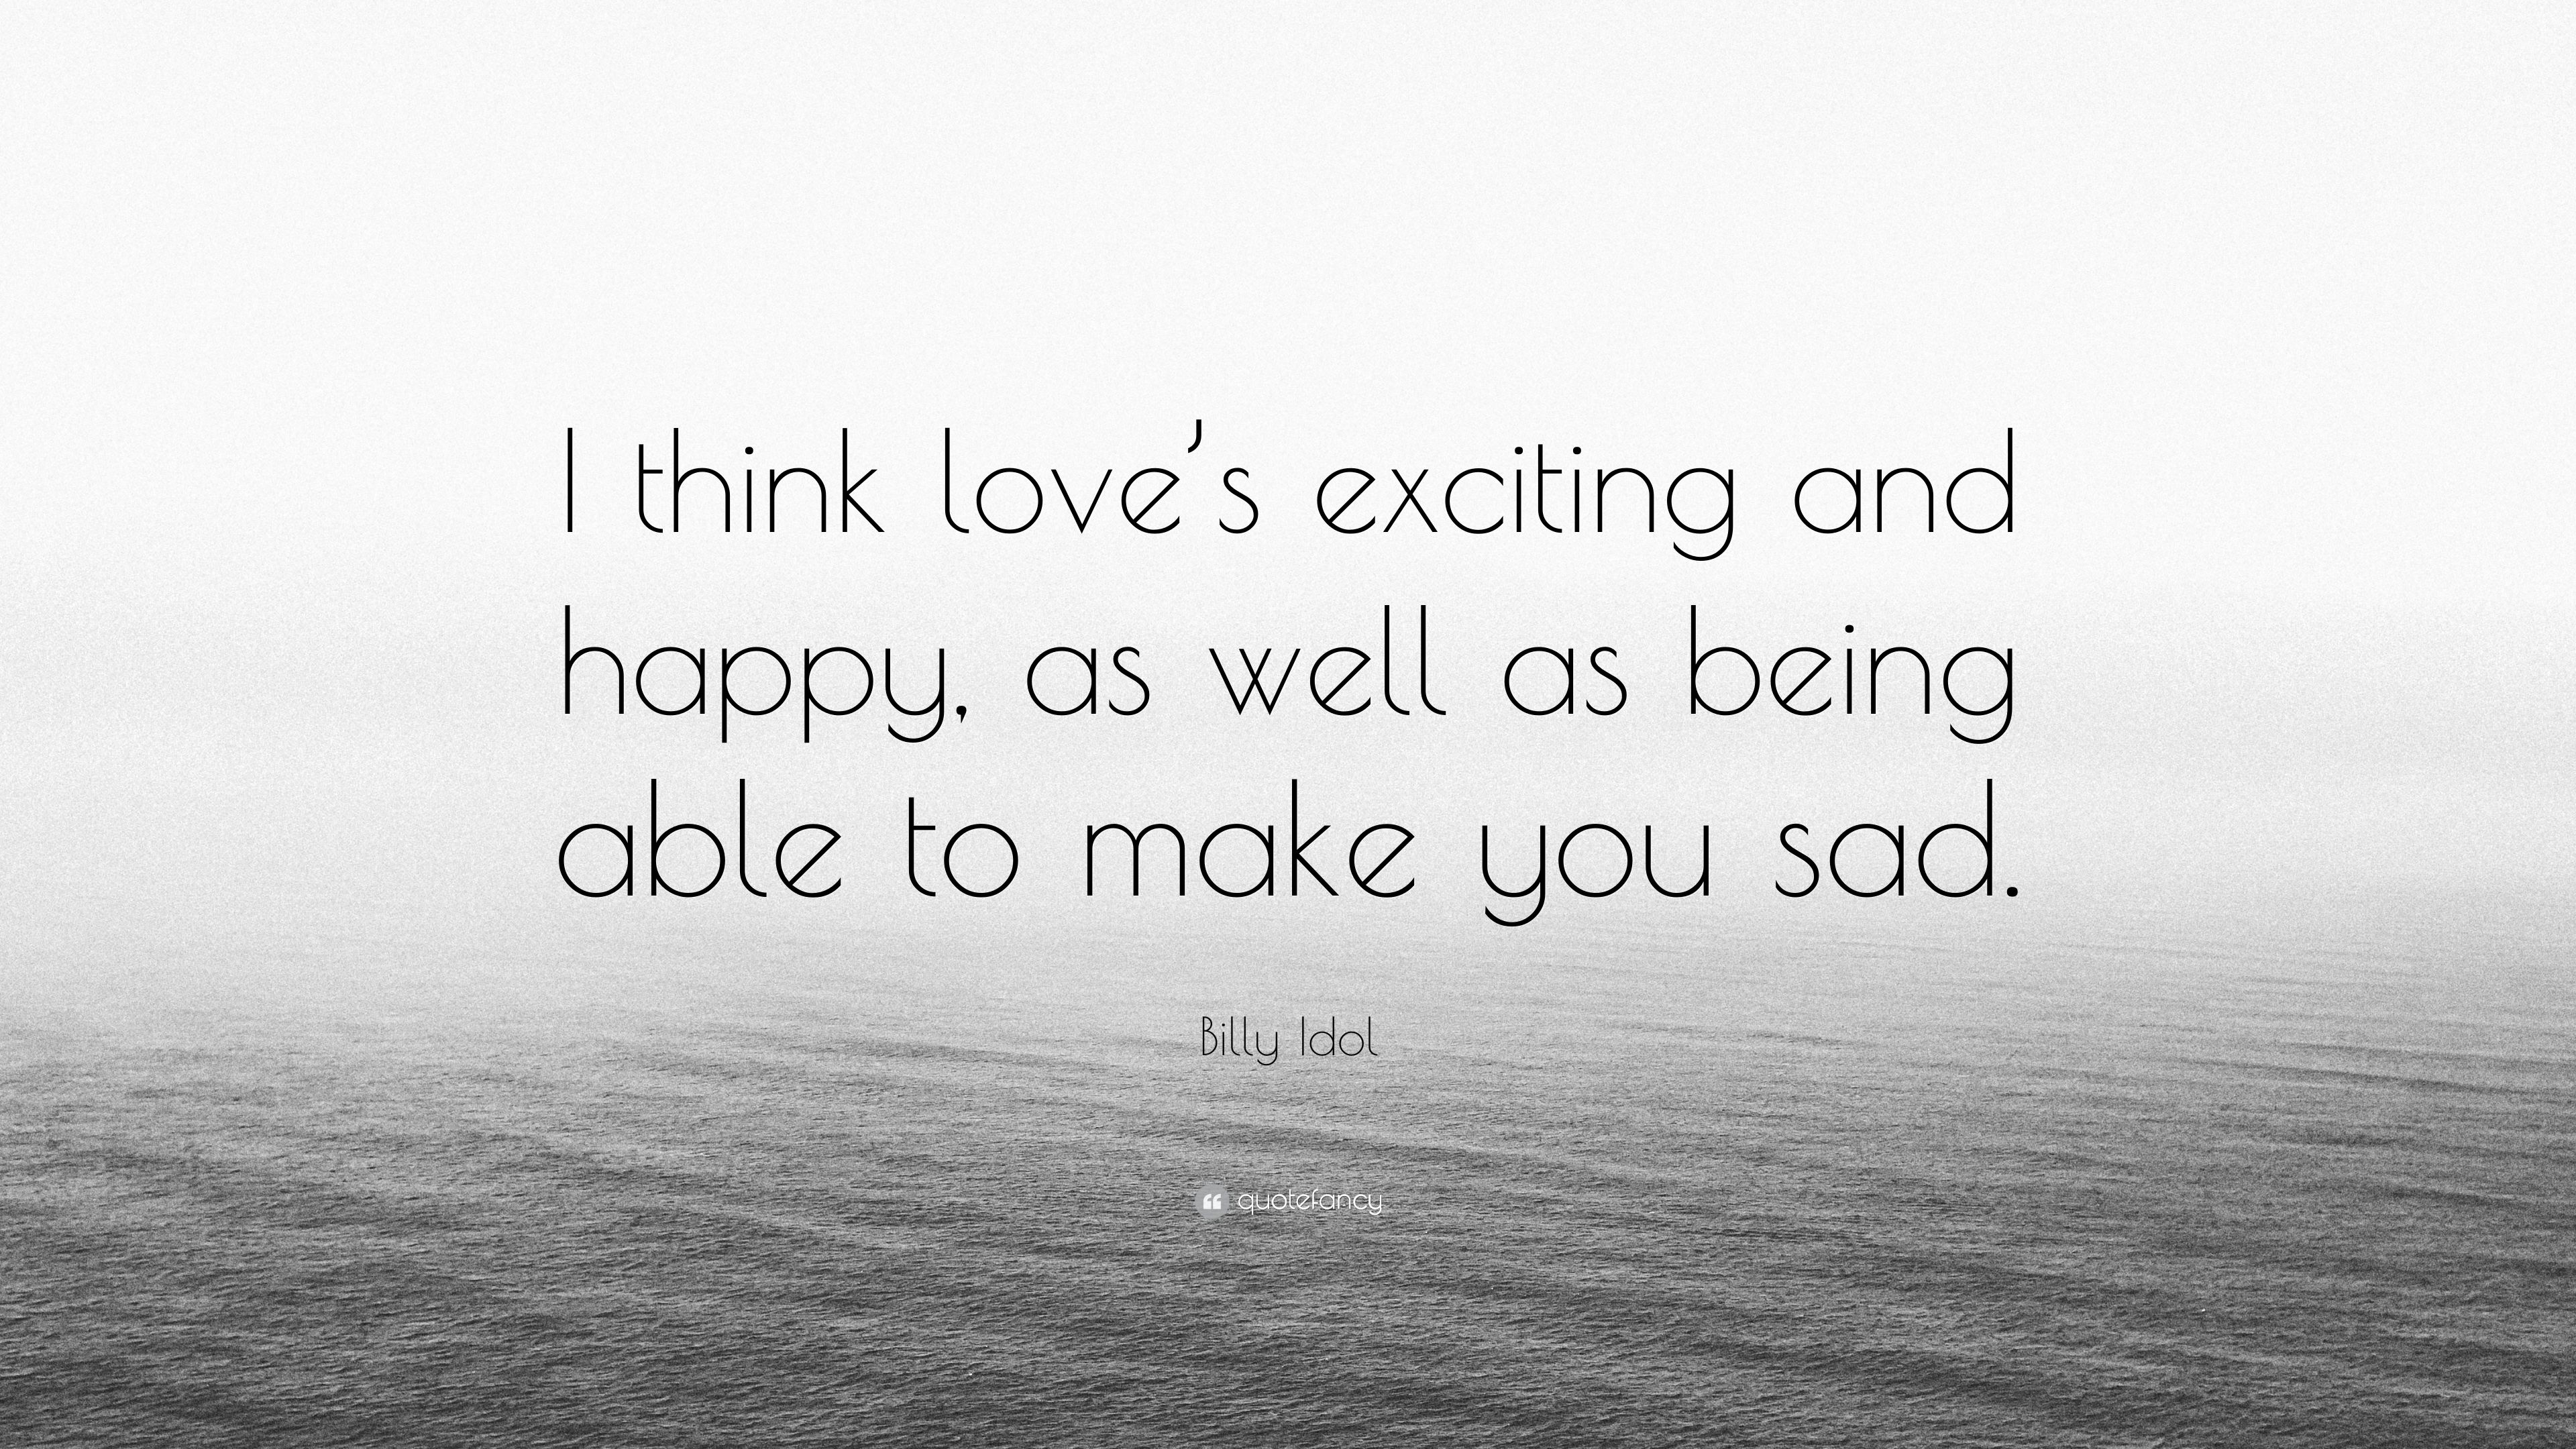 Billy Idol Quote: “I think love's exciting and happy, as